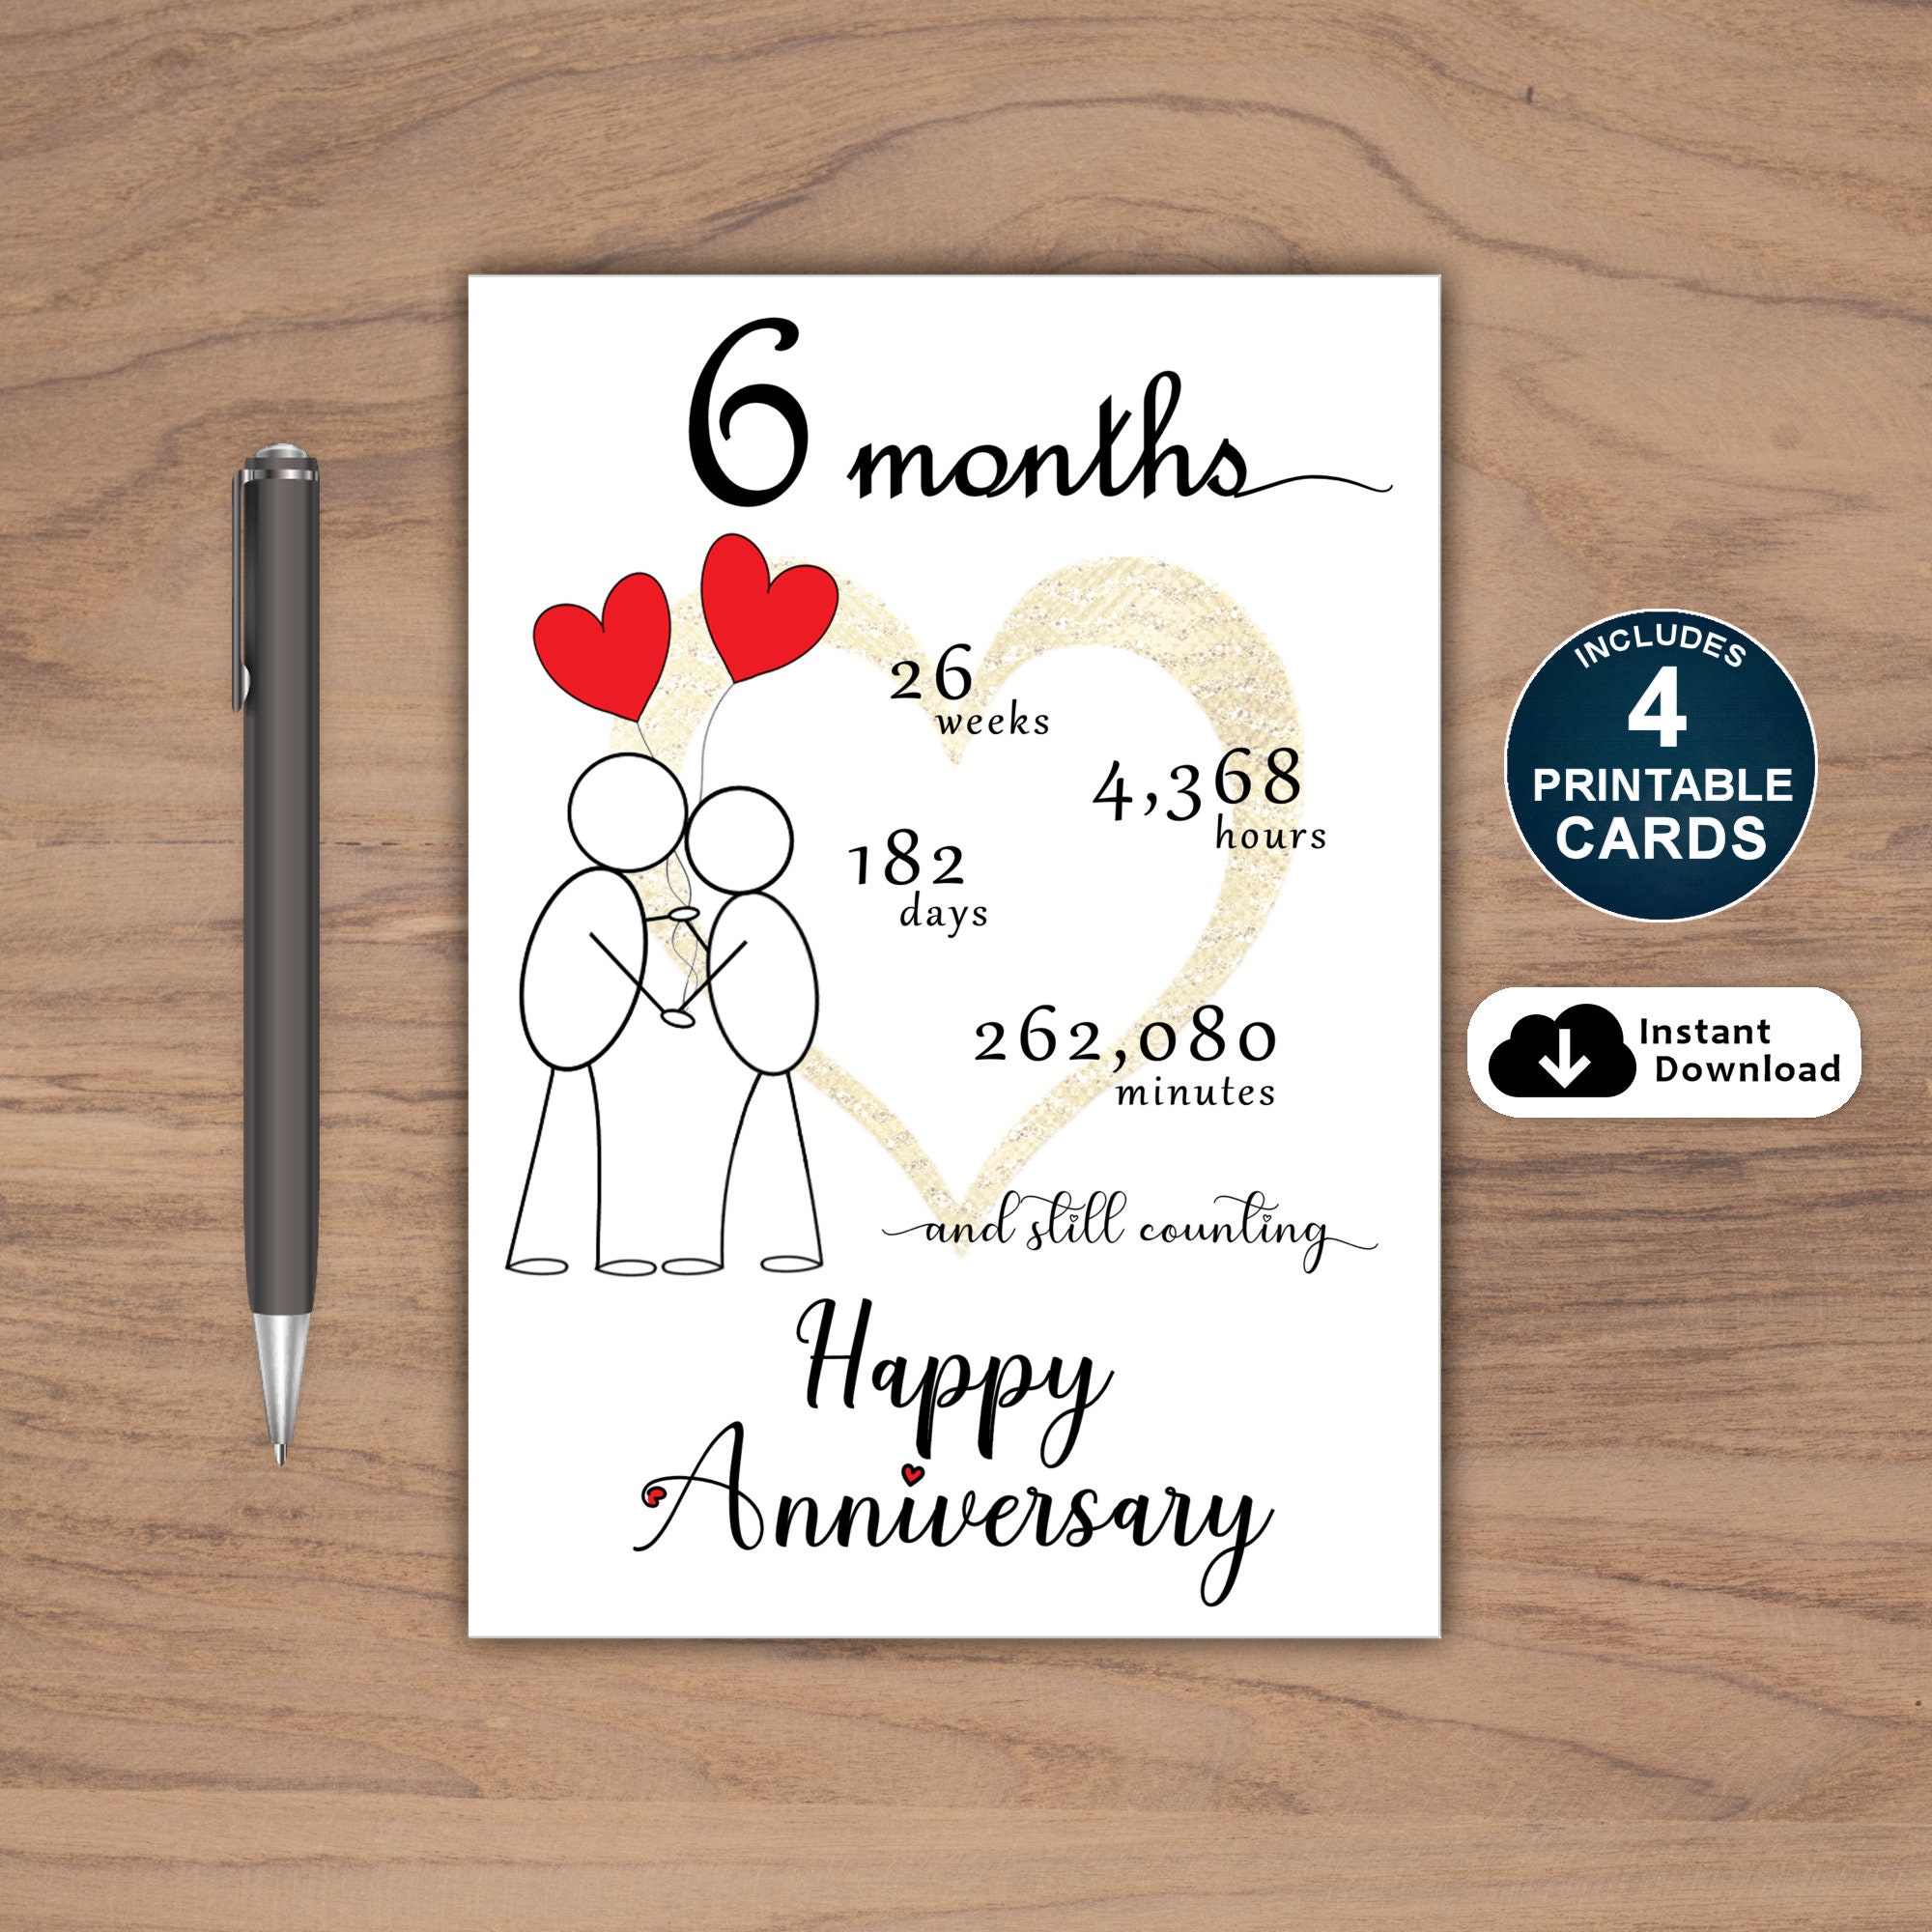 Happy Anniversary My Love Notebook : 1st year anniversary gift for boyfriend  - Best Gag Gifts for boyfriend or girlfriend - Unique Valentines Day,  Anniversary or Birthday Present for any romantic moment (